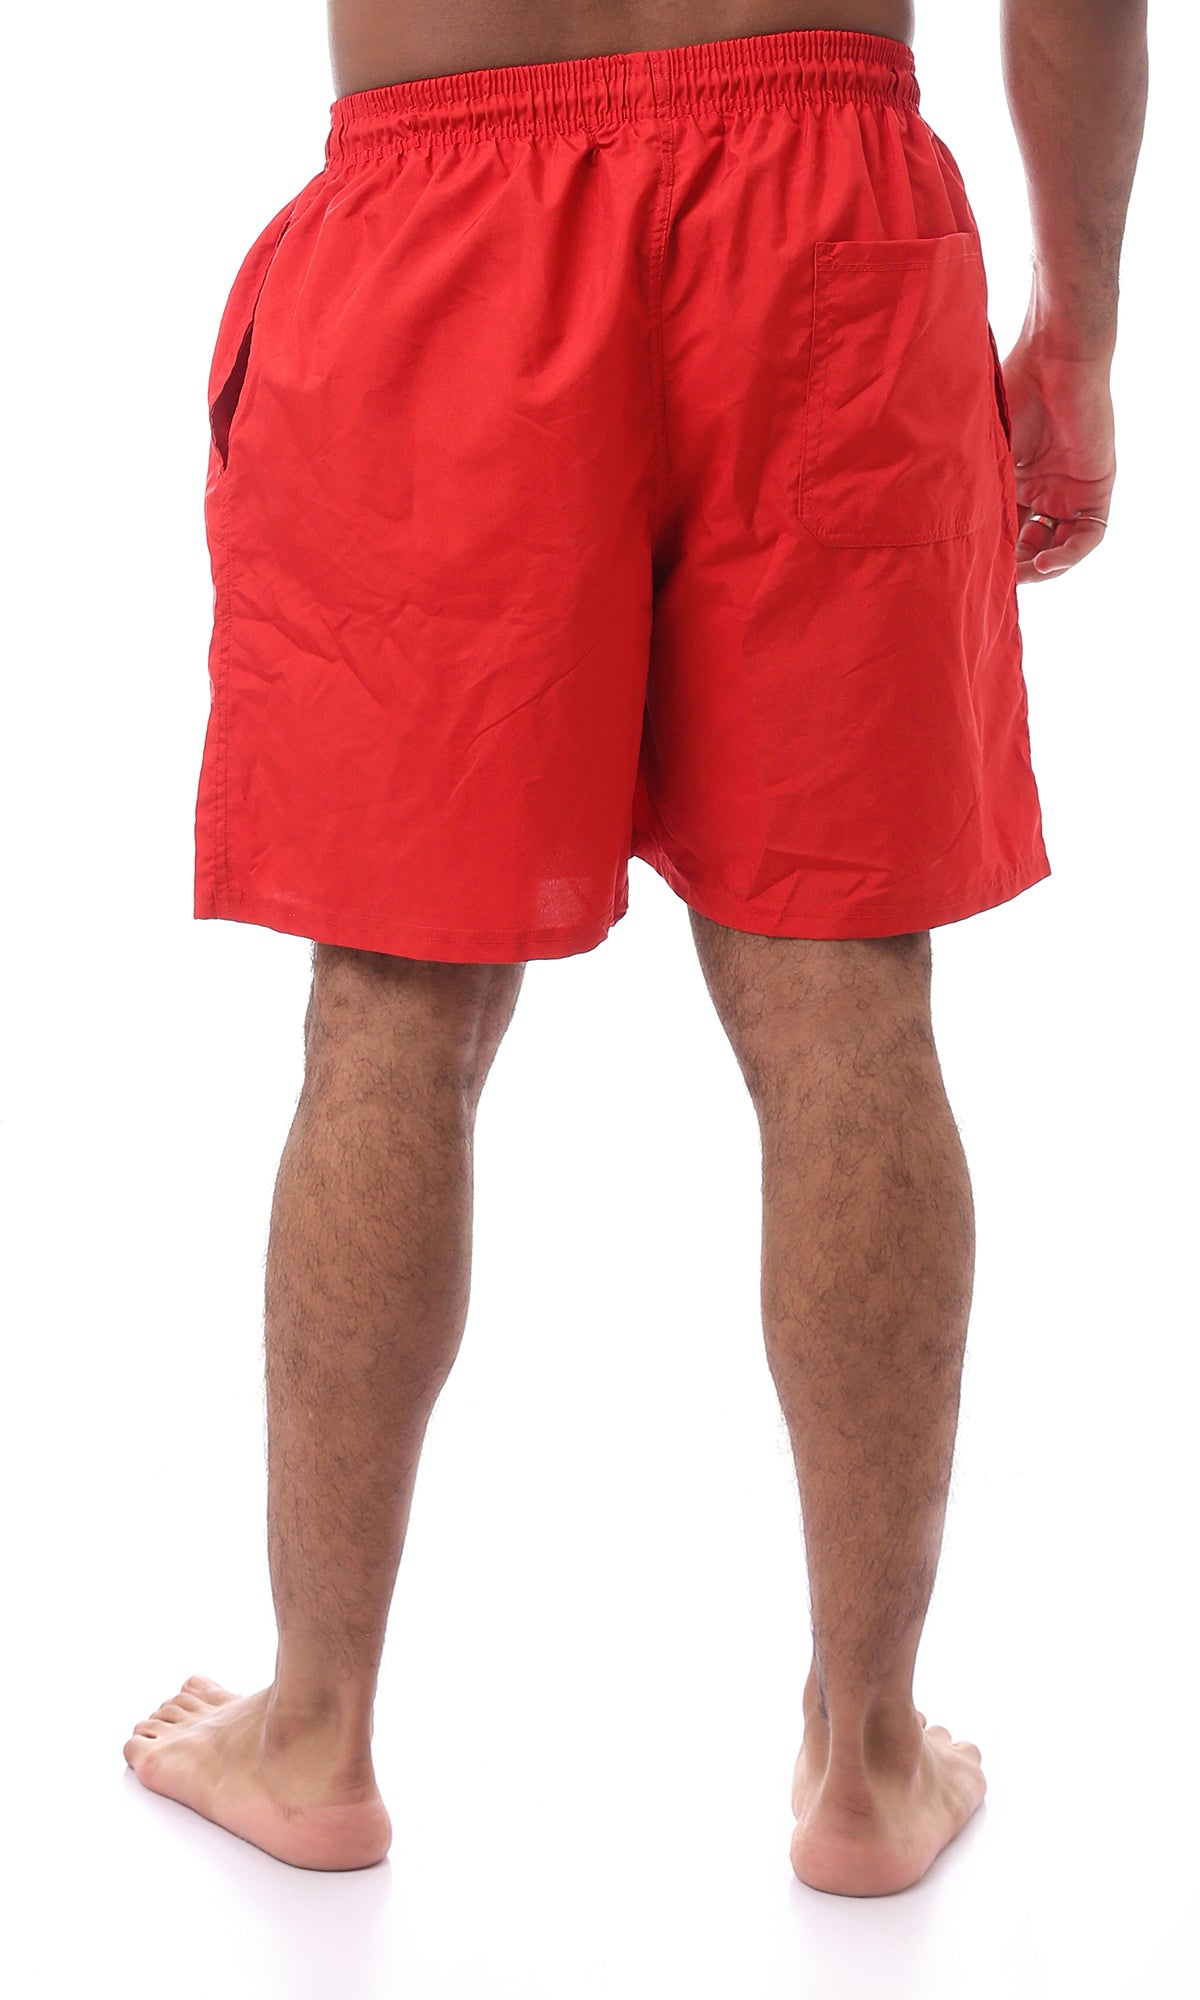 O170437 Slip On Red Comfy Board Shorts